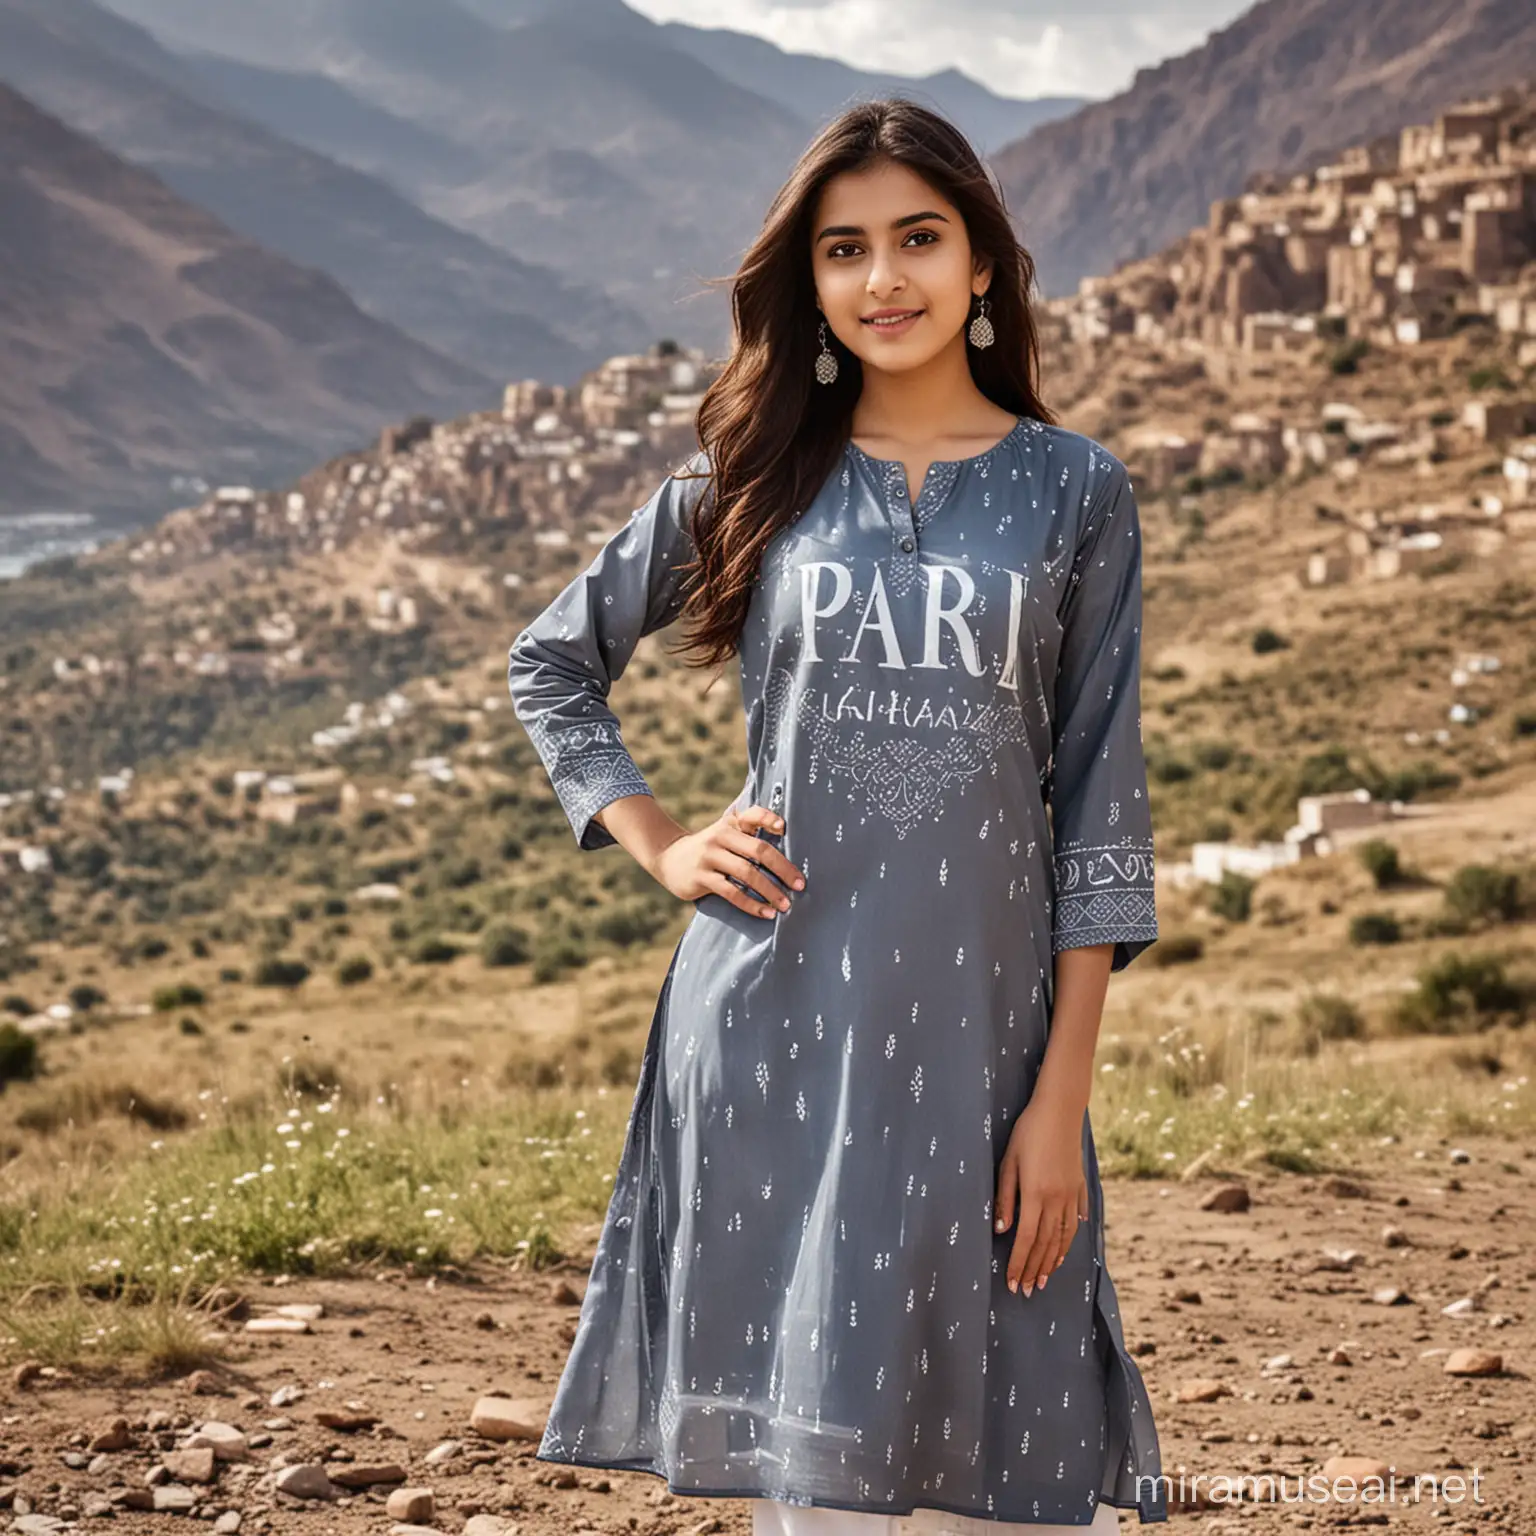 A beautiful 16-year-old girl named Pari, wearing a stylish kurti with the name 'Pari' printed in silver letters, striking an amazing pose. The background is a scenic view, enhancing the beauty of the overall image
